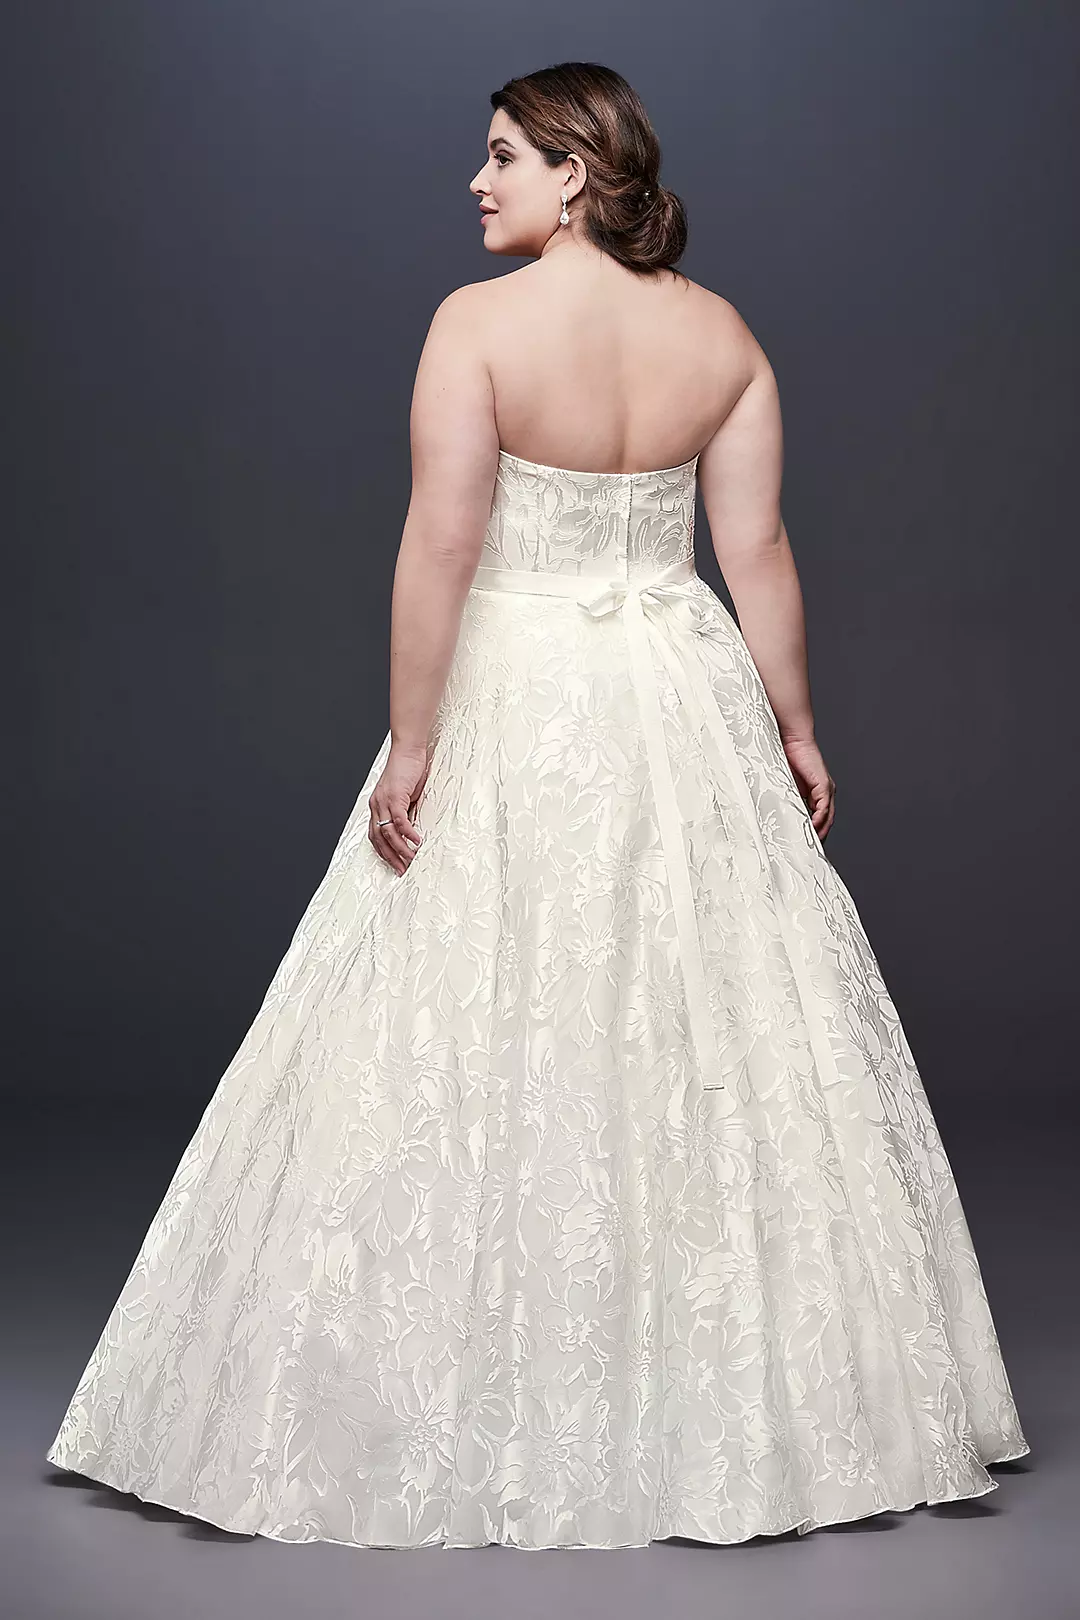 As-Is Printed A-line Plus Size Wedding Dress Image 2